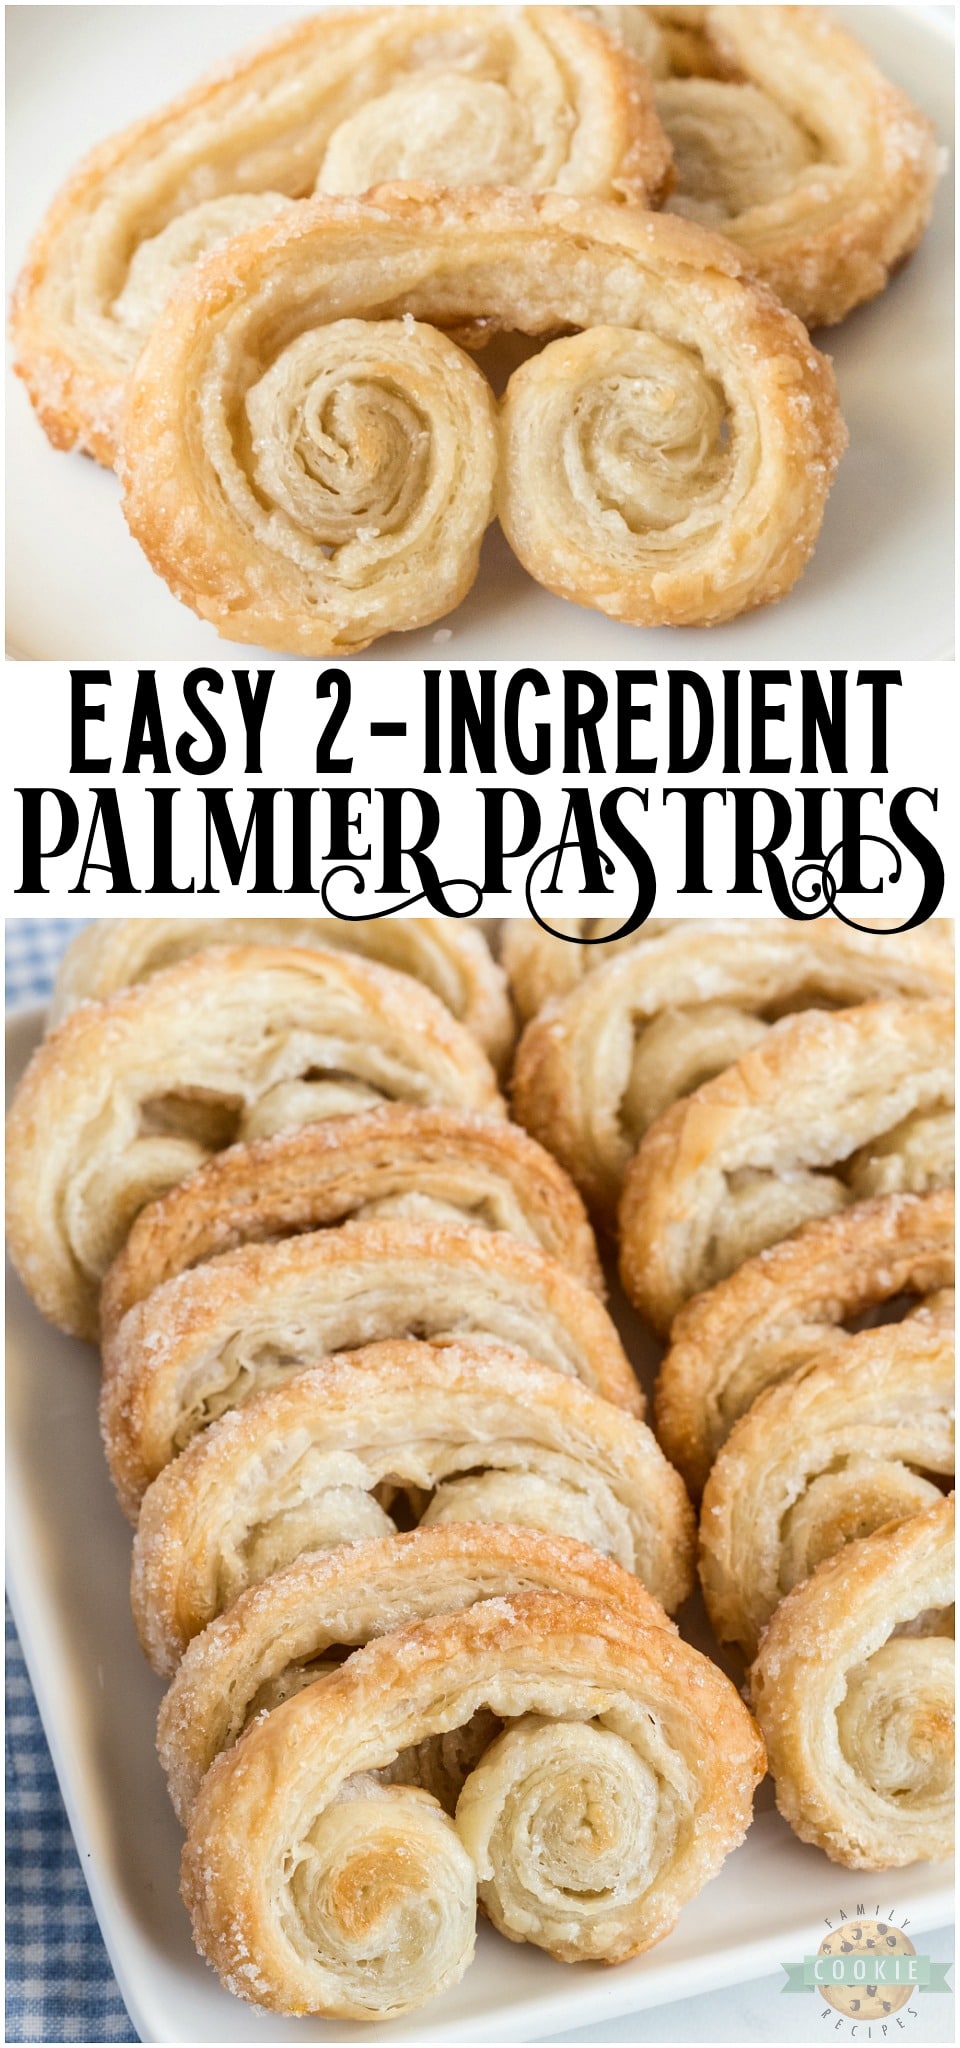 Easy Palmiers recipe made with just 2 ingredients: puff pastry and sugar! Enjoy buttery, flaky homemade Palmiers in just 30 minutes! Anyone can make these fancy looking cookies!